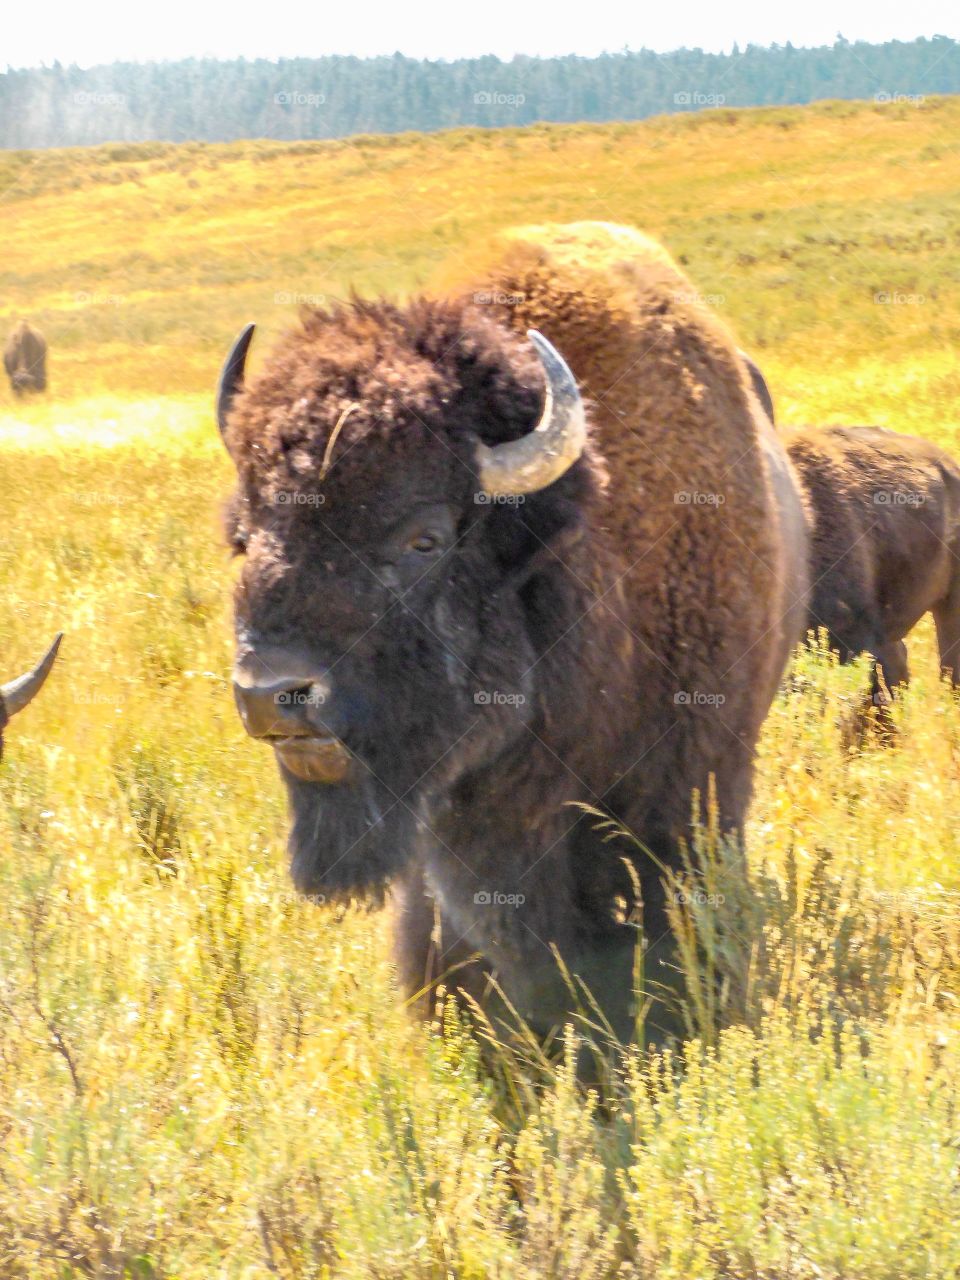 Bison in Yellowstone 